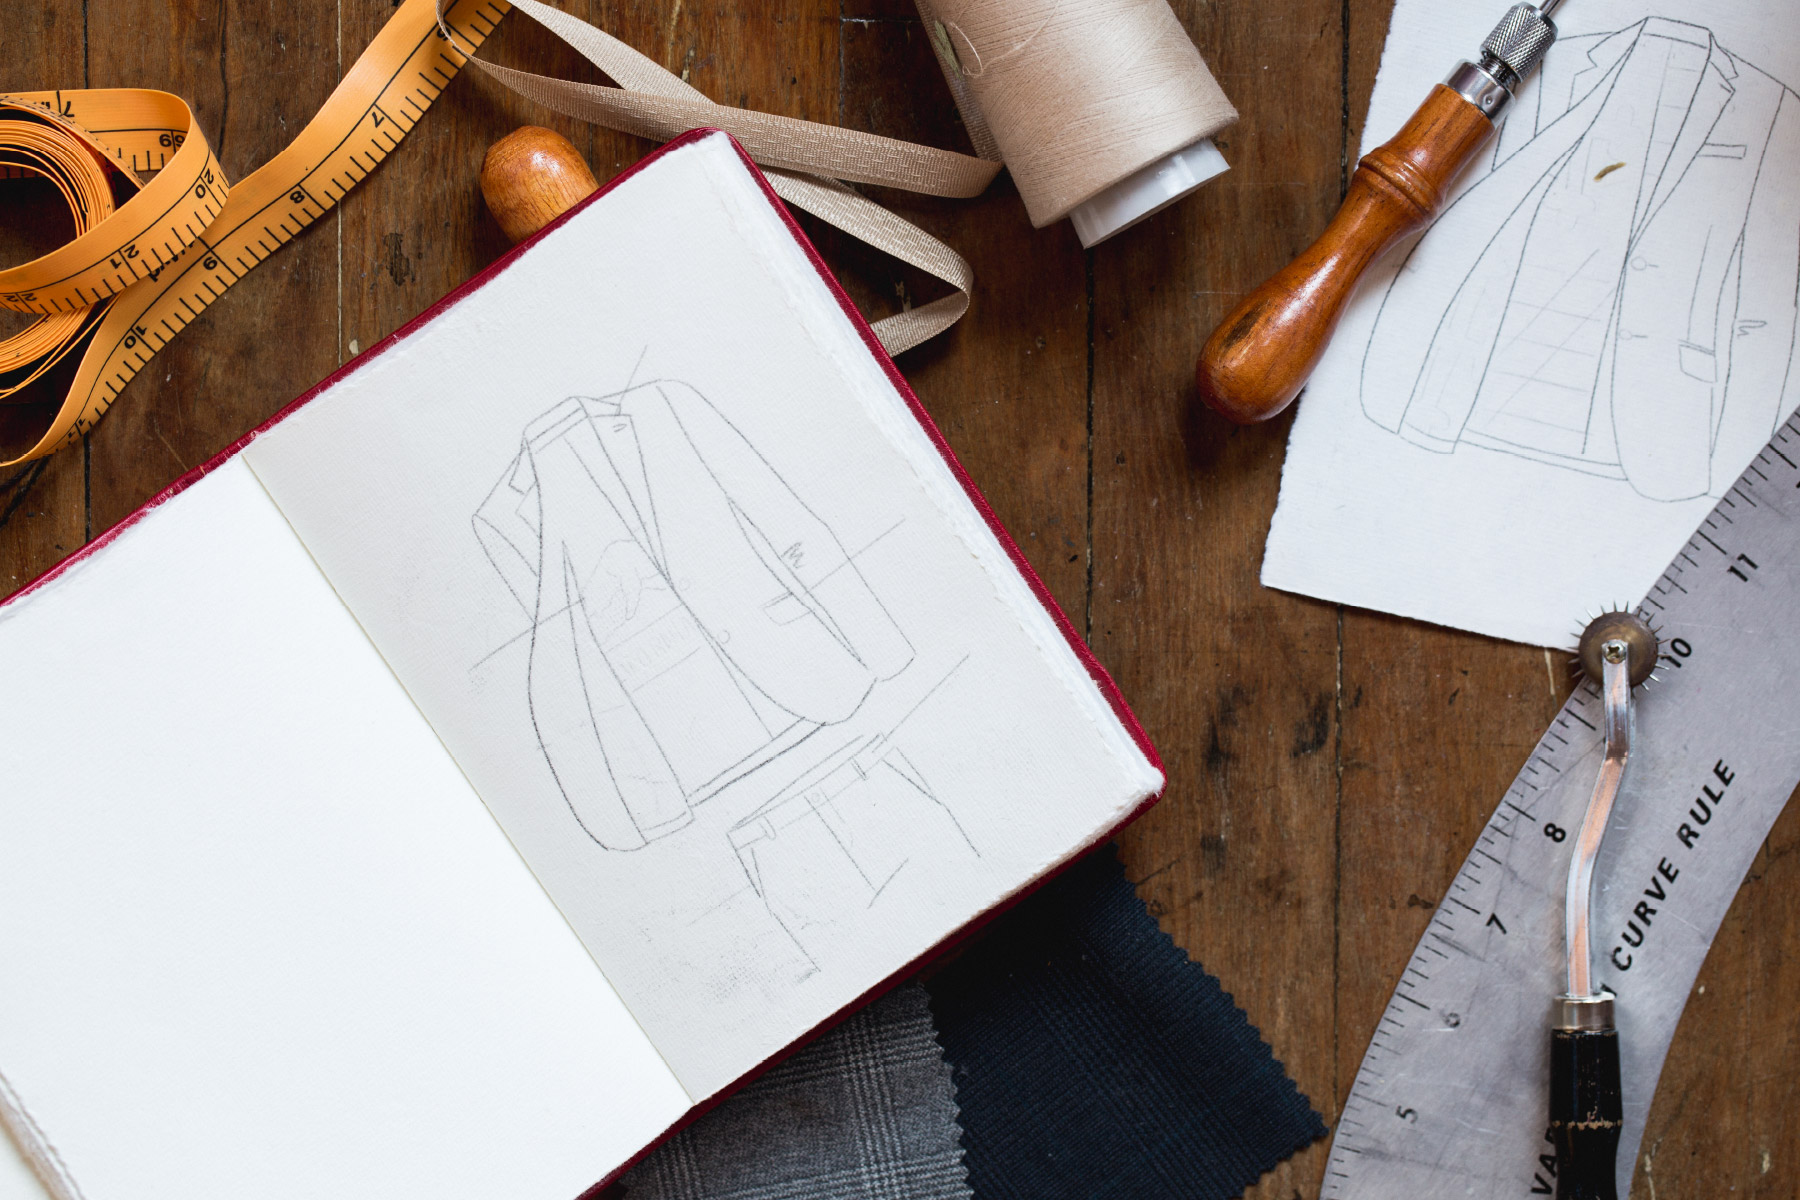 Fuze-Branding-Product-Photography-Small-Business-Evolution-Of-Style-Custom-Mens-Suit-Company-Detail-Sketches-Jacket-Design